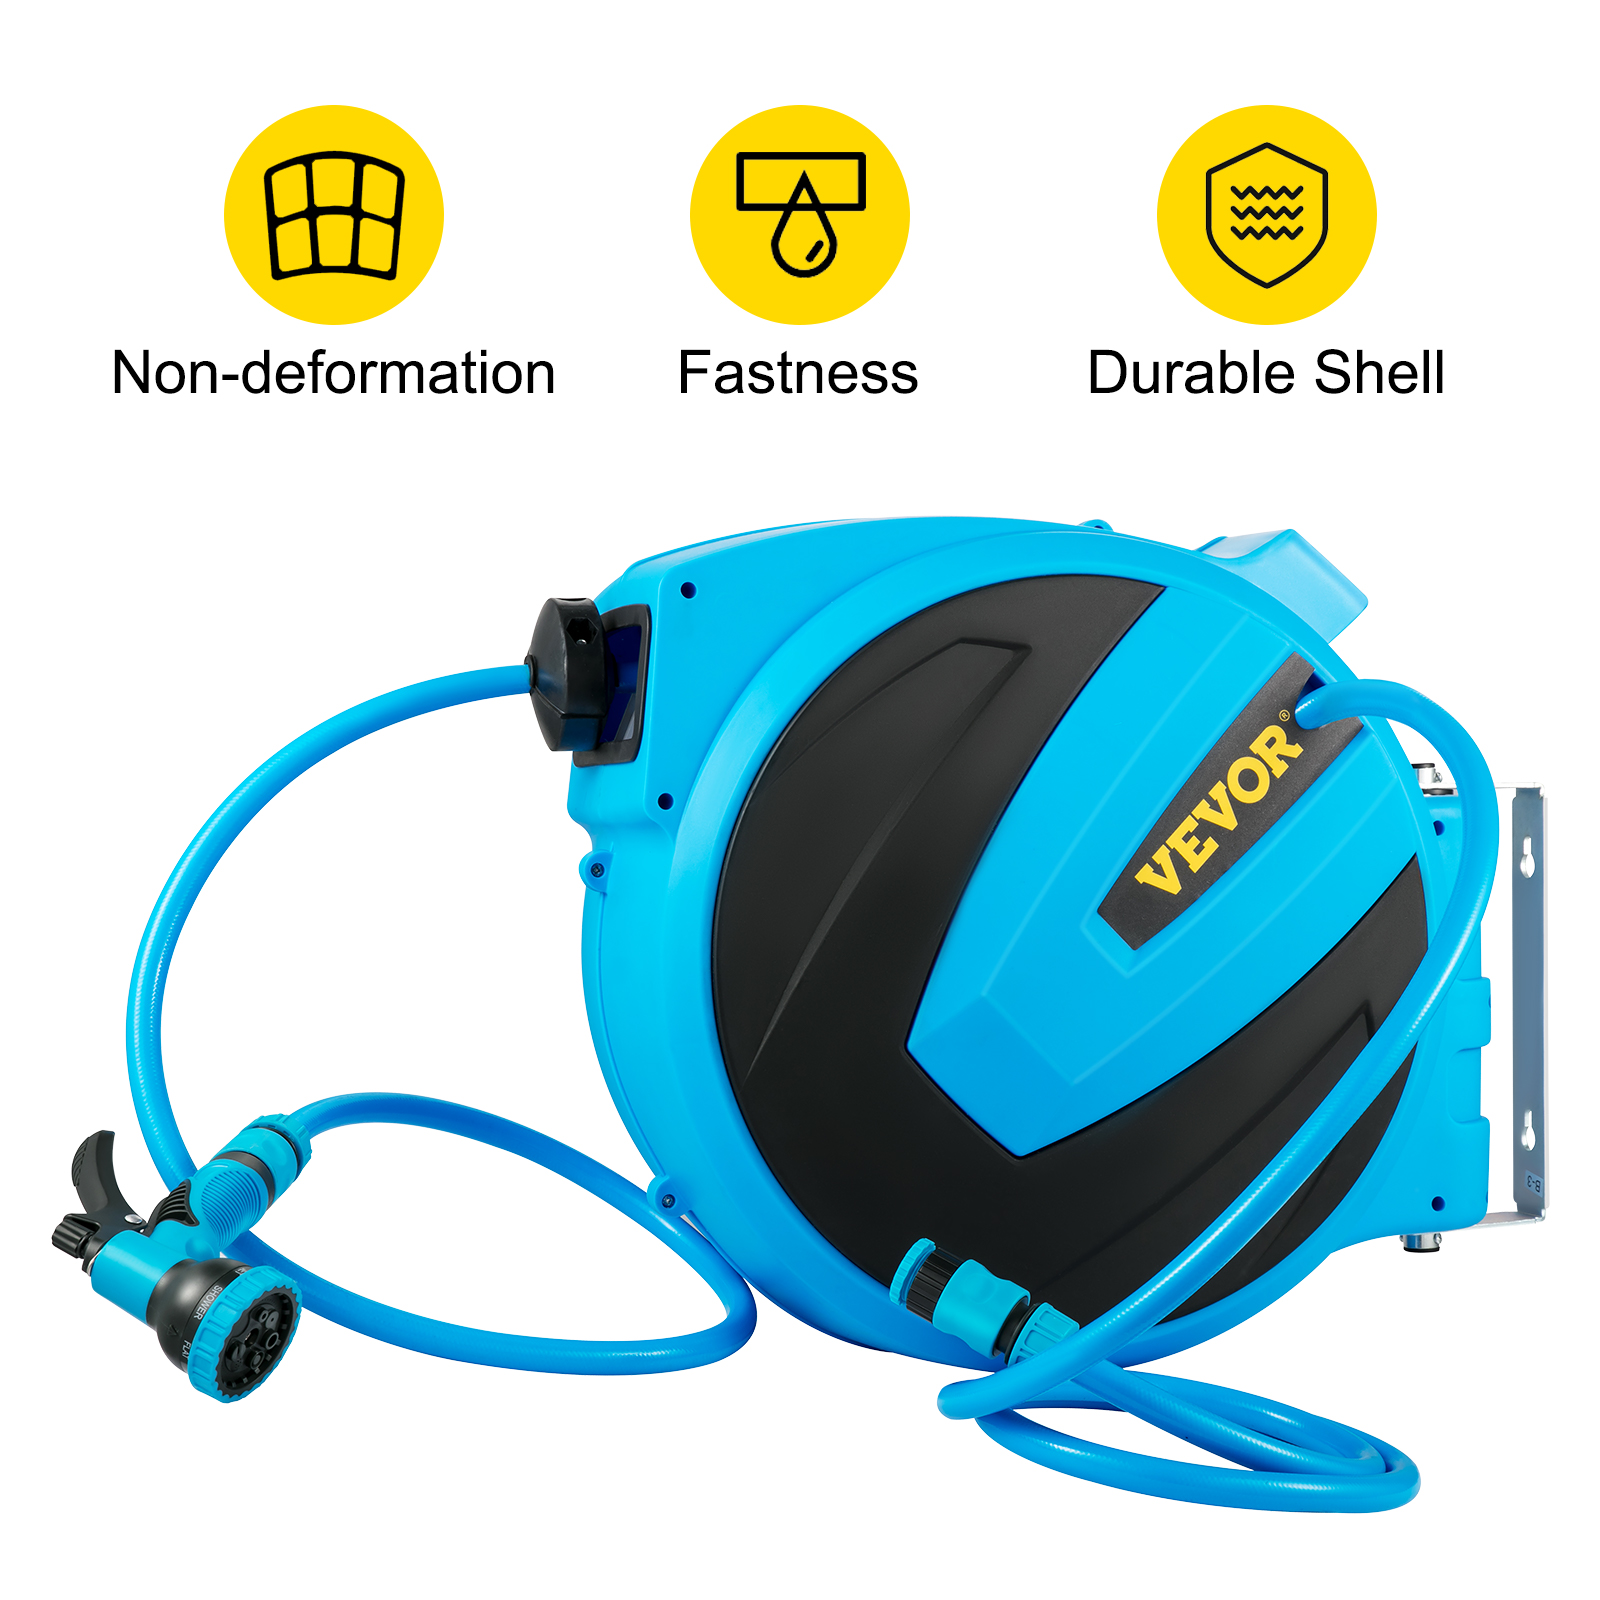 https://d2qc09rl1gfuof.cloudfront.net/product/SS100FT12INCHWY85/retractable-hose-reel-m100-3.jpg